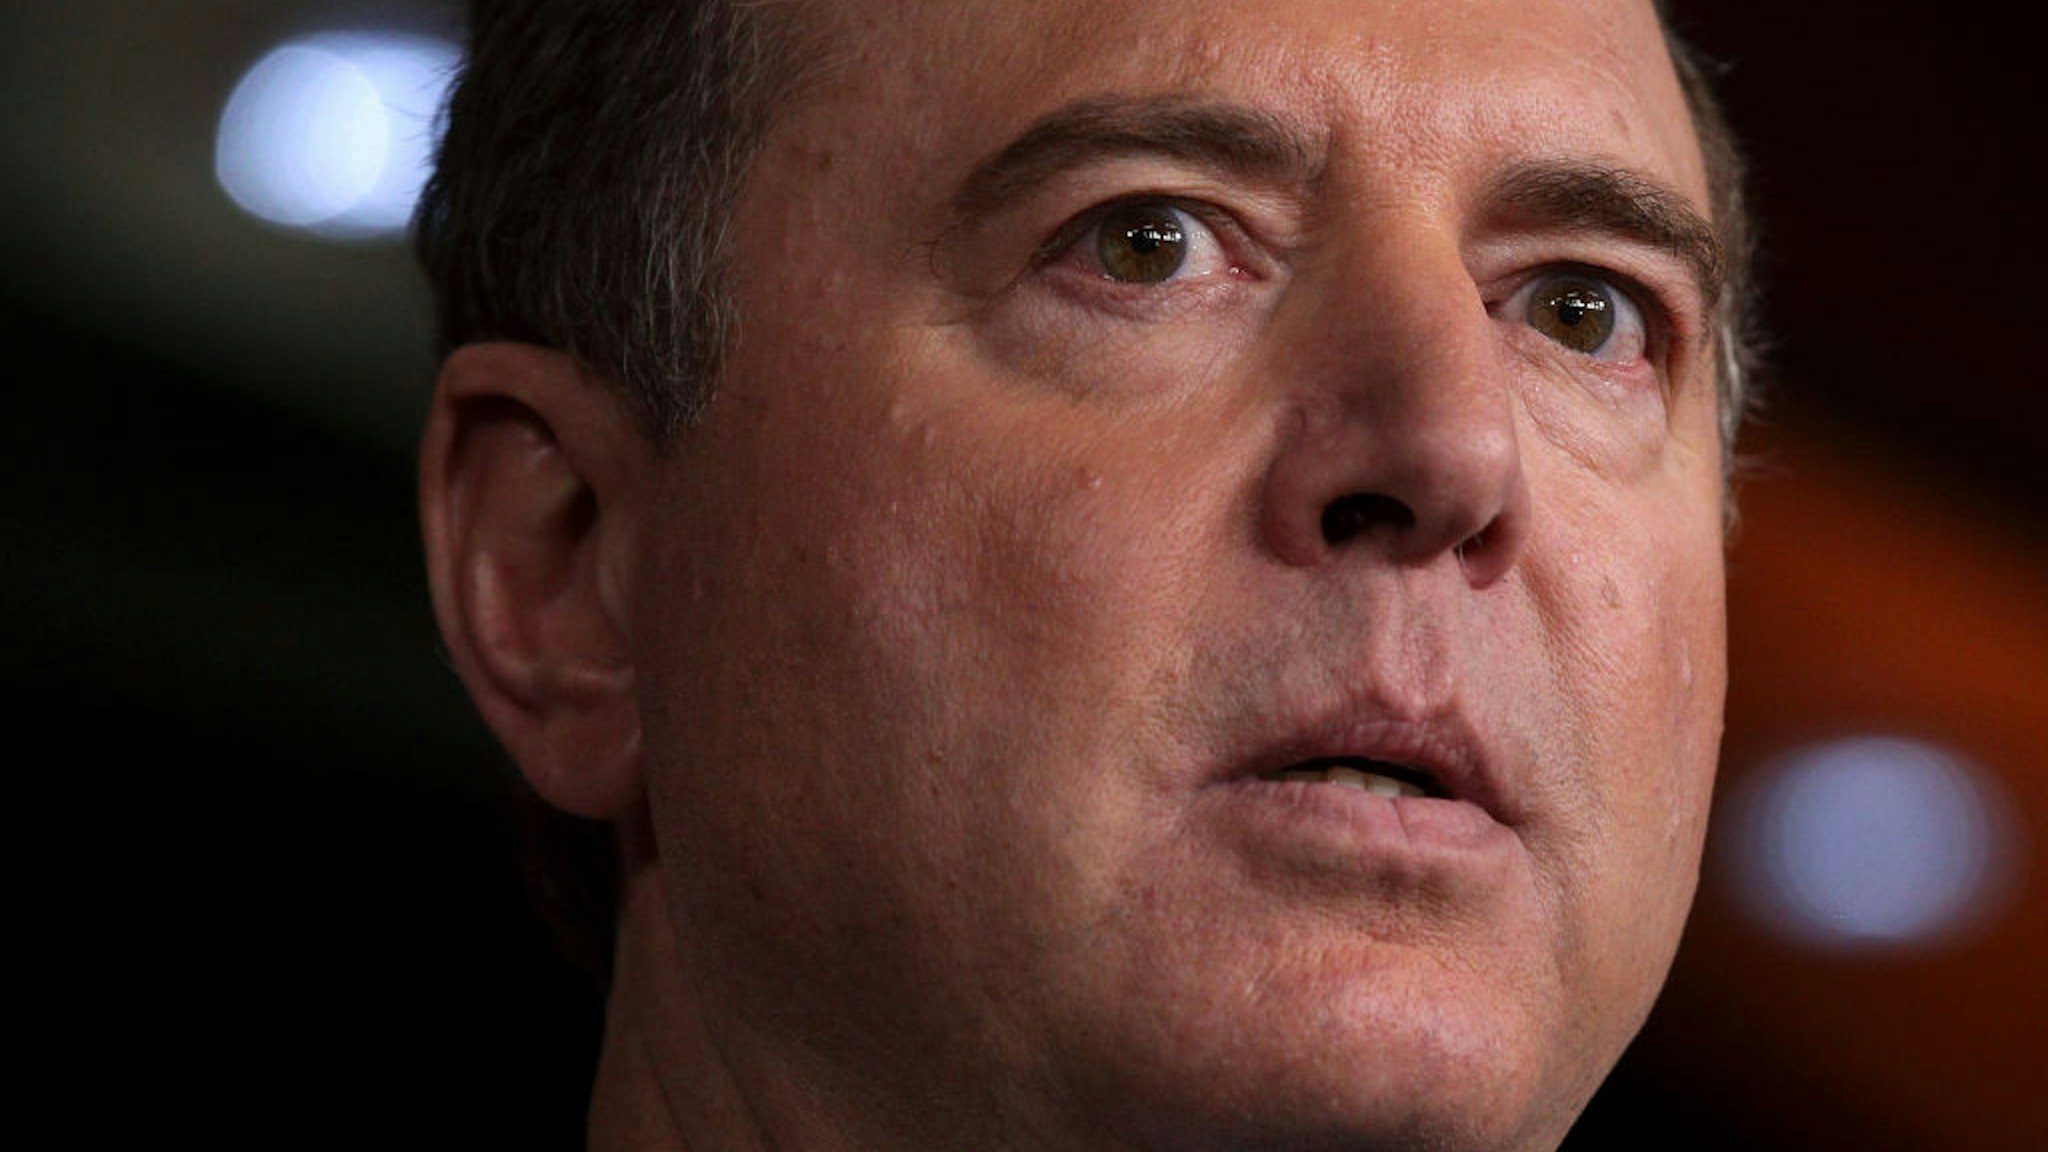 U.S. Rep. Adam Schiff (D-CA), chairman of the House Intelligence Committee, speaks during a news conference at the U.S. Capitol September 25, 2019 in Washington, DC.